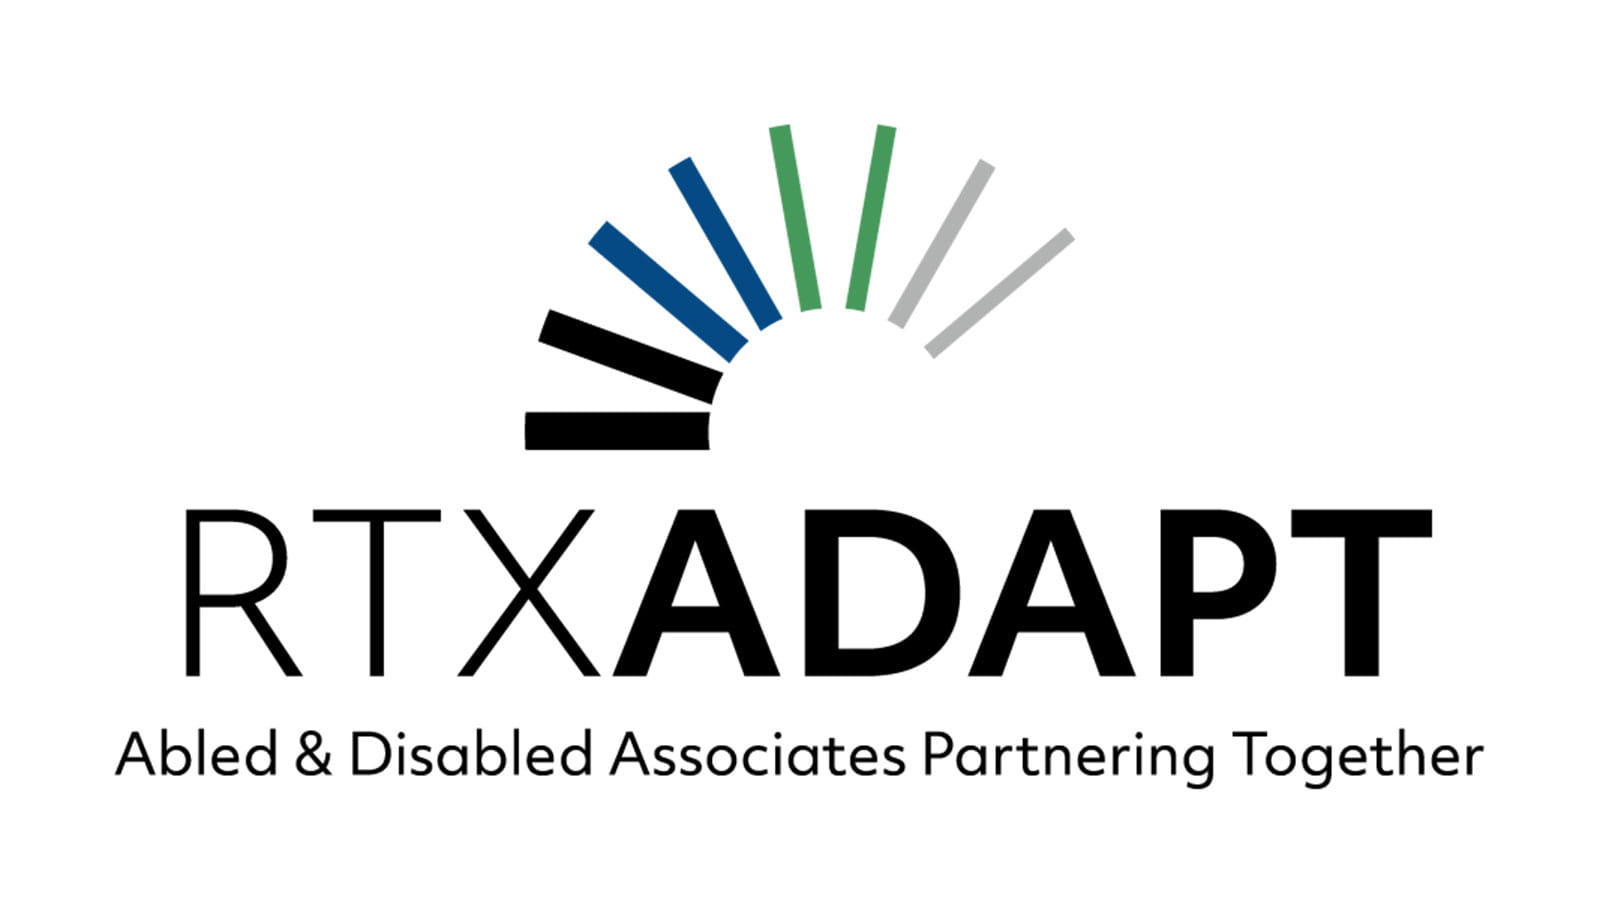 RTXADAPT abled and disabled associates partnering together